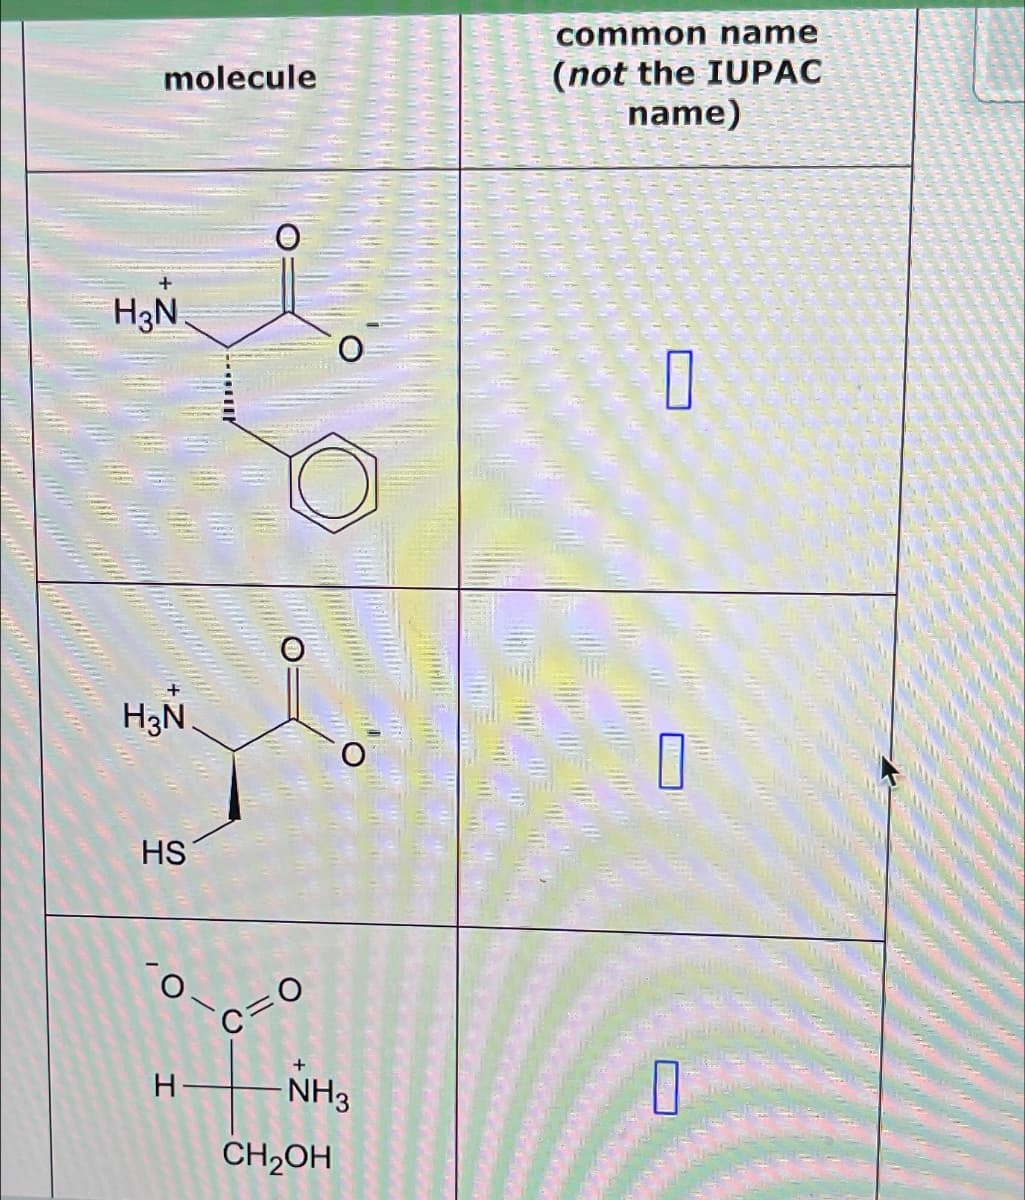 molecule
common name
(not the IUPAC
name)
H3N
+
H3N
HS
O
☐
Ο
H
о
C=
O
+
NH3
CH2OH